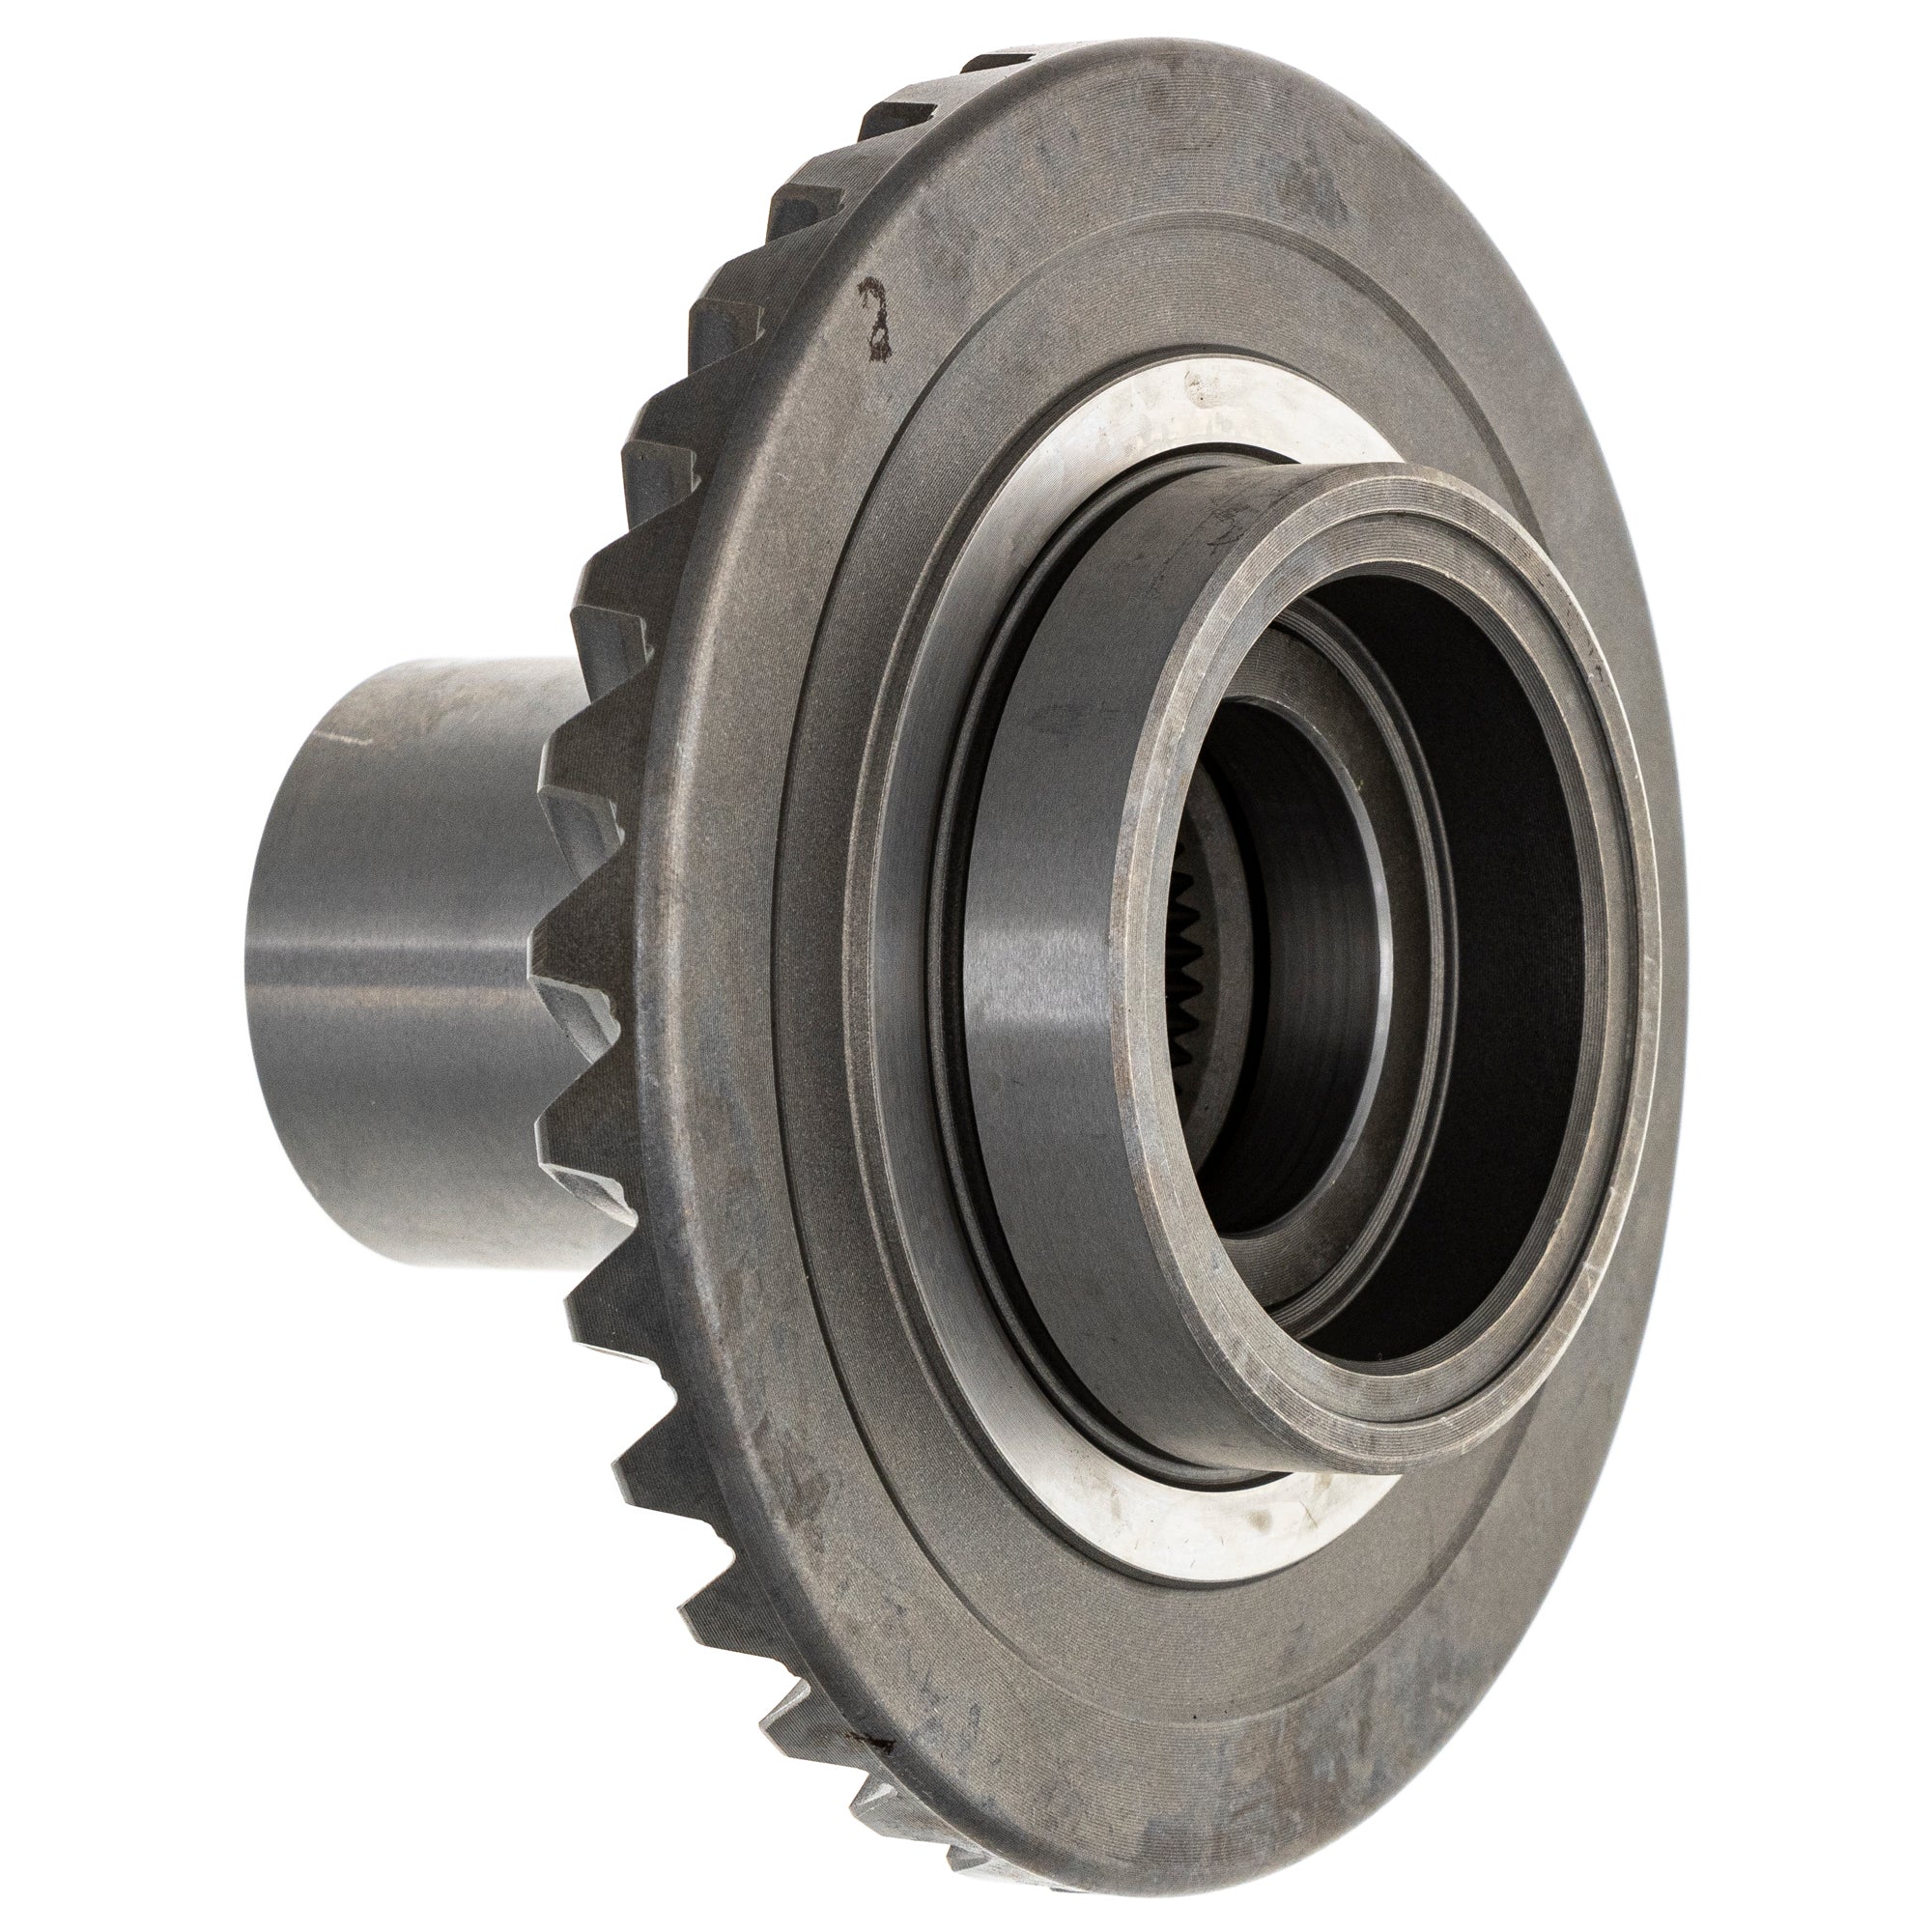 Front Differential Ring Pinion Gear For Yamaha 5KM-46470-13-00 5KM-46470-12-00 5KM-46470-11-00